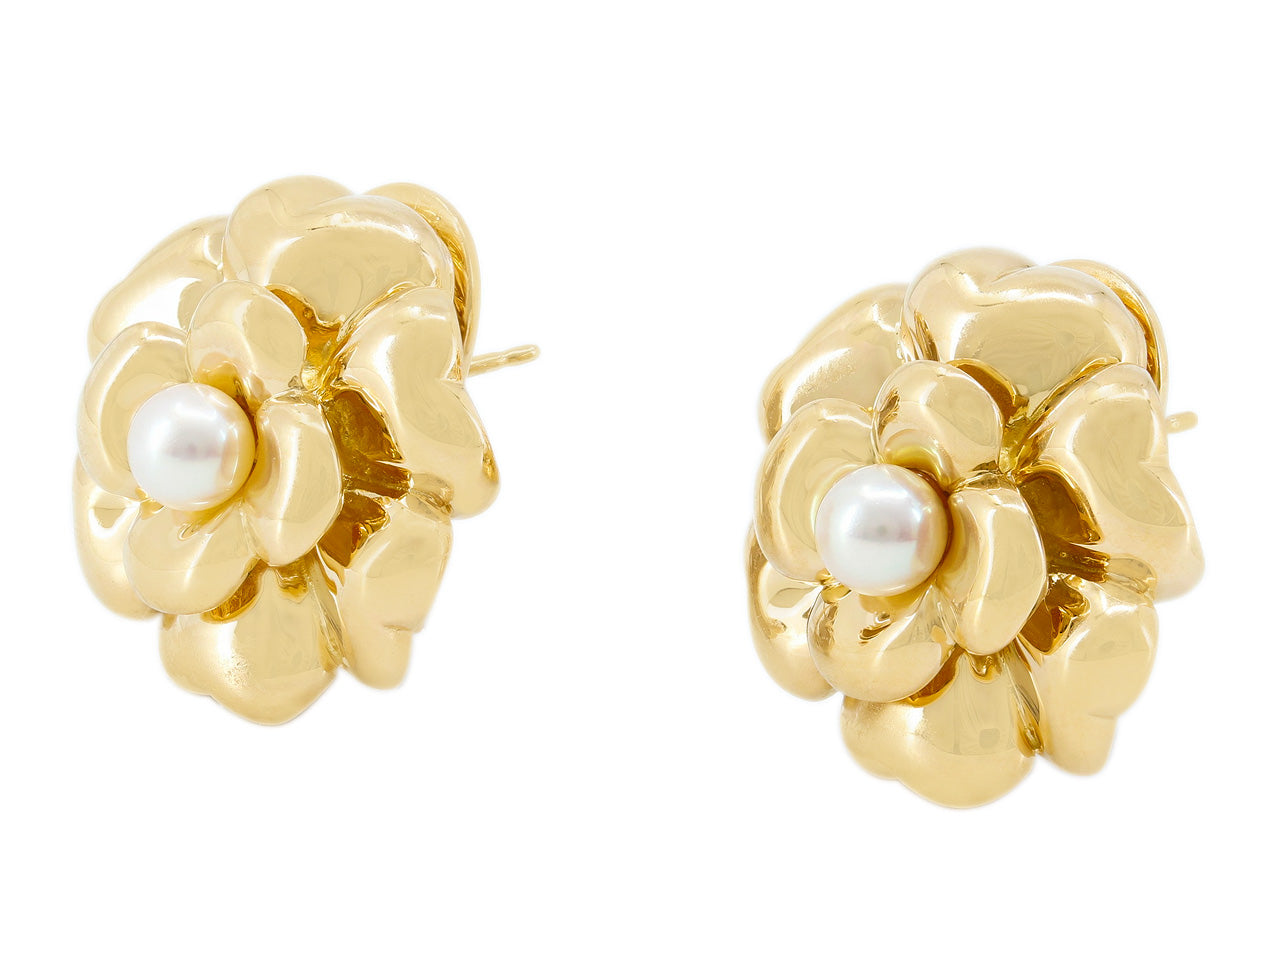 Chanel No 5 Style Enameled Camellia Flower and Pearl Earrings